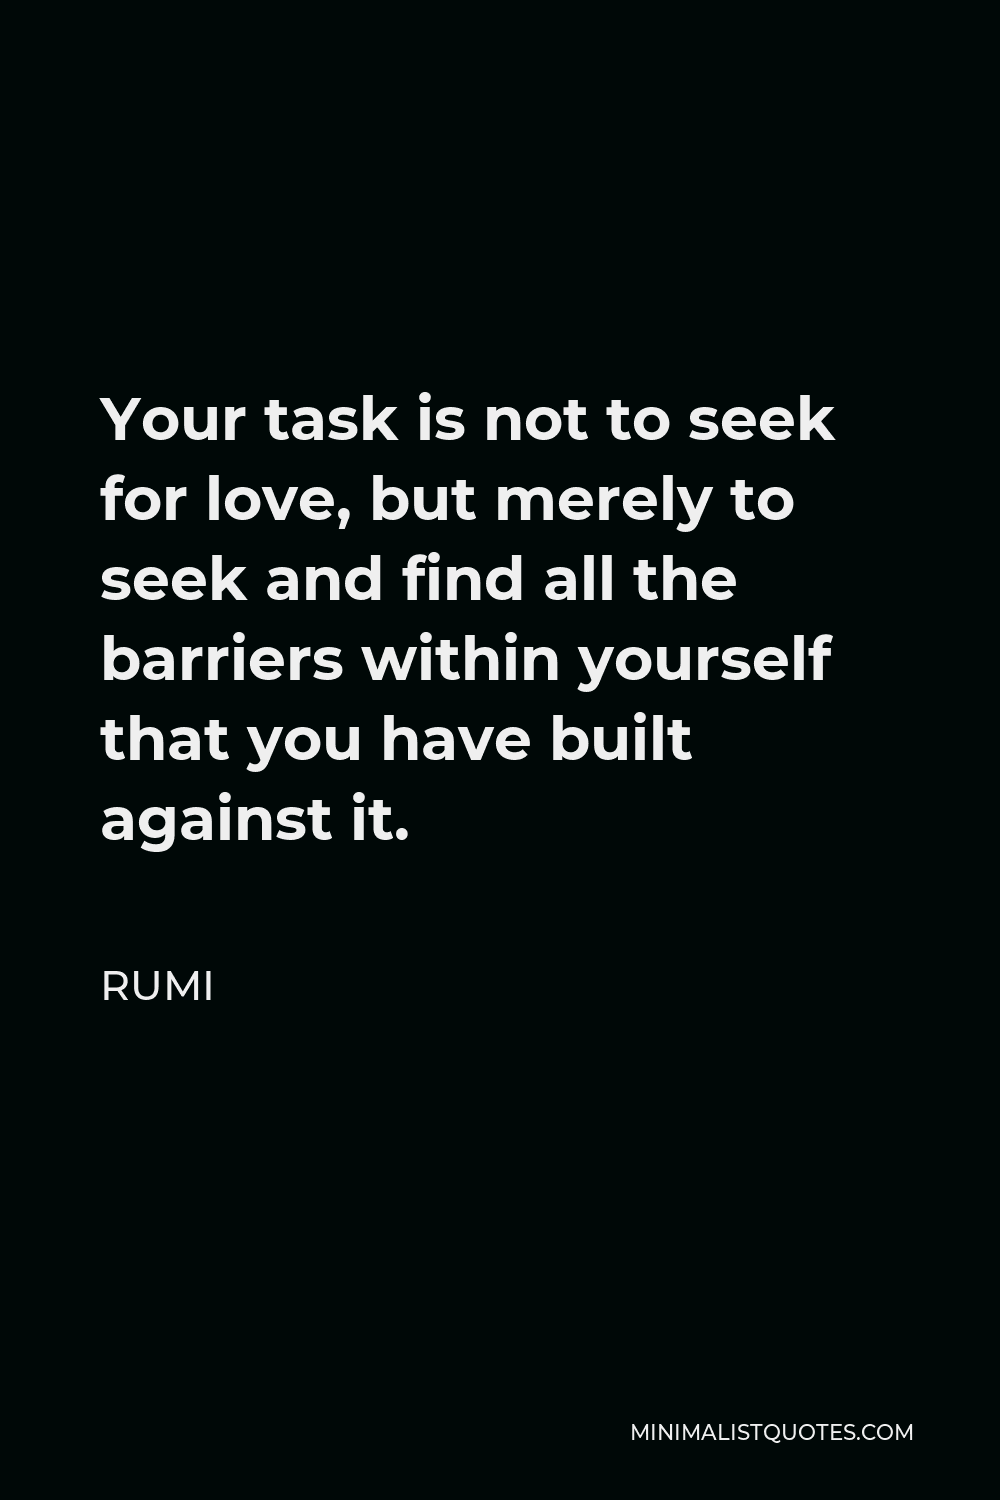 Rumi Quote - Your task is not to seek for love, but merely to seek and find all the barriers within yourself that you have built against it.